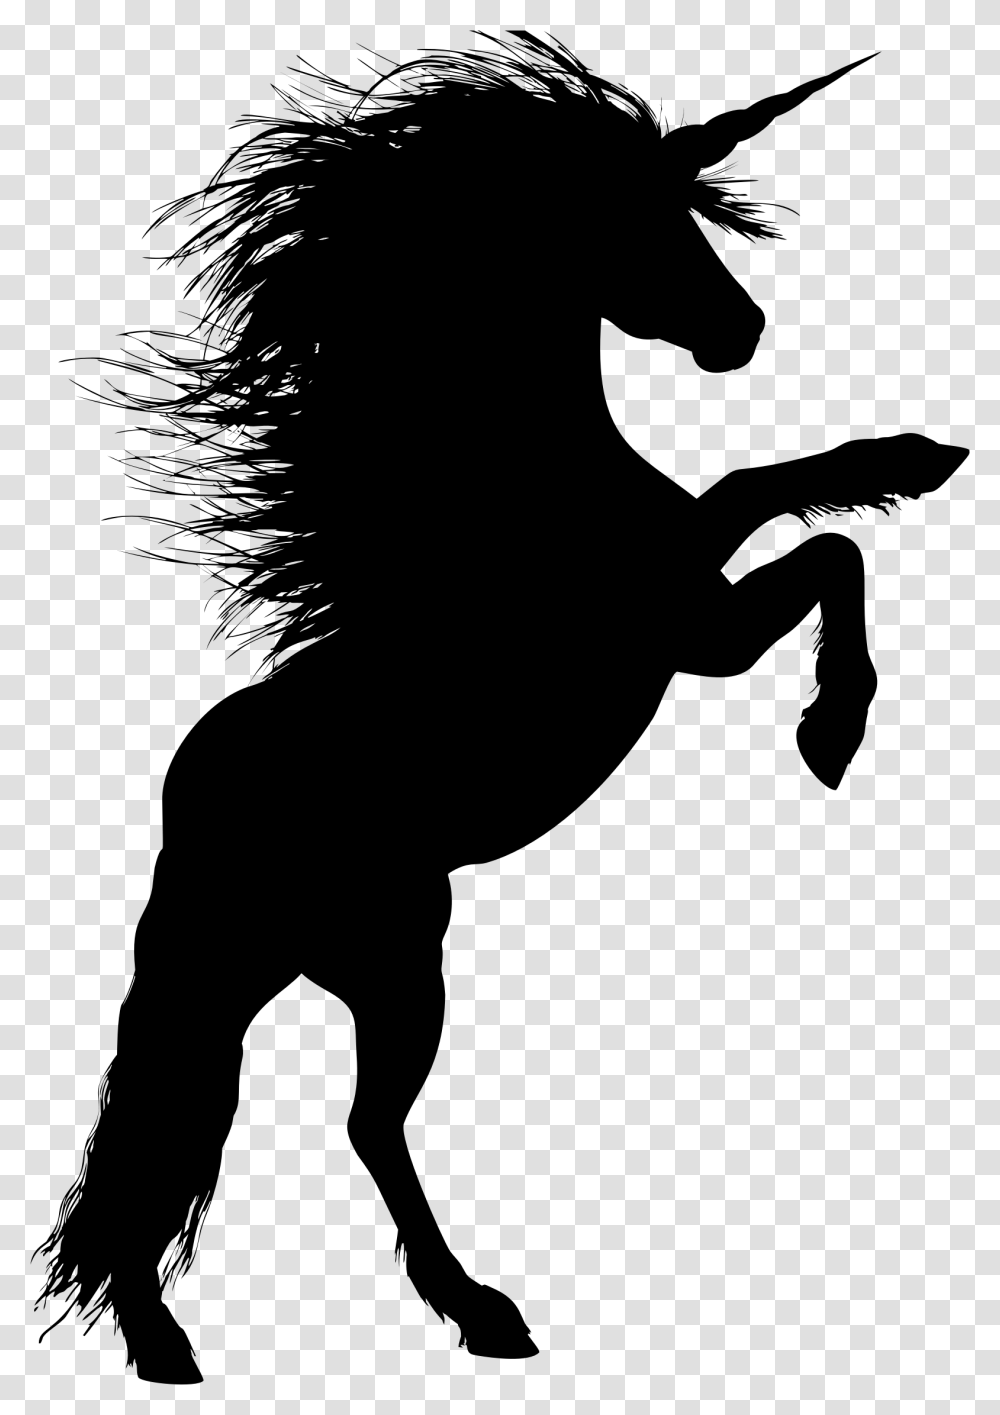 Animal Equine Rearing Horse Silhouette Ride Unicorn Silhouette Rearing Up, Gray Transparent Png